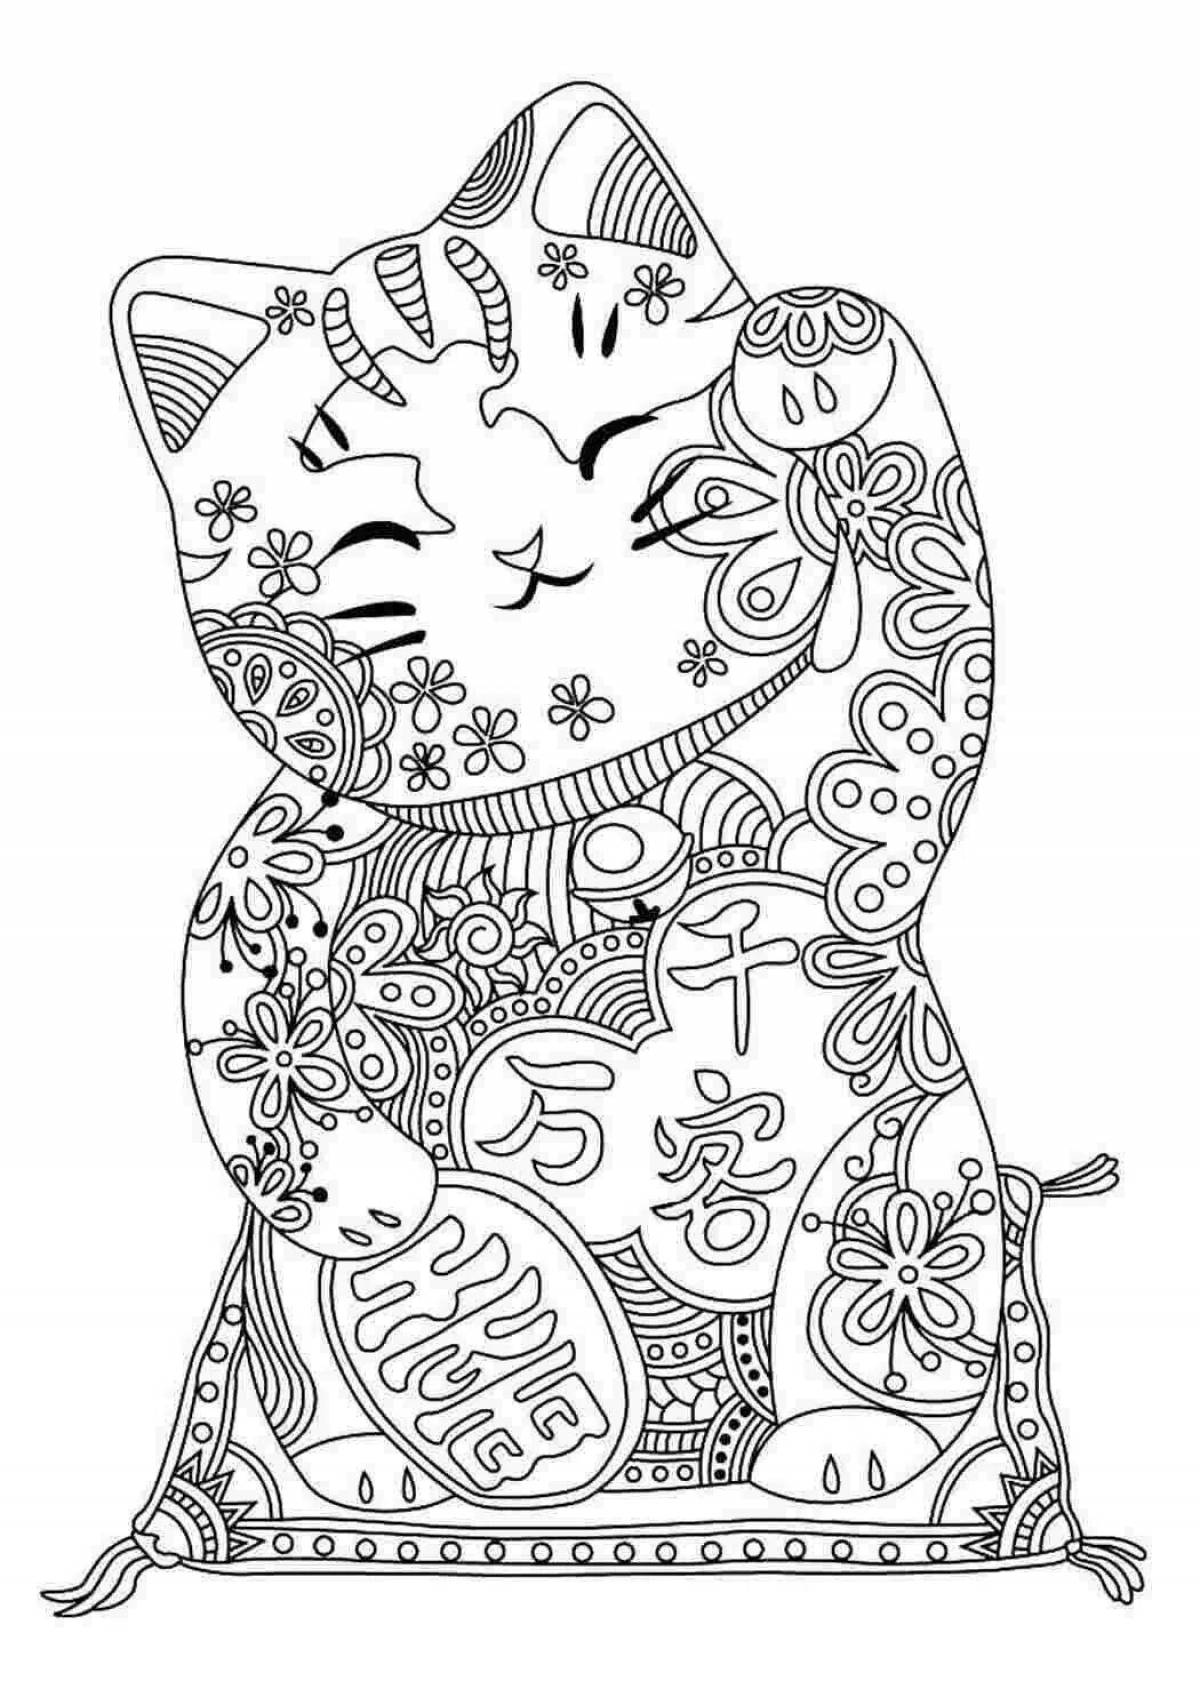 Fun coloring book relaxation antistress for adults